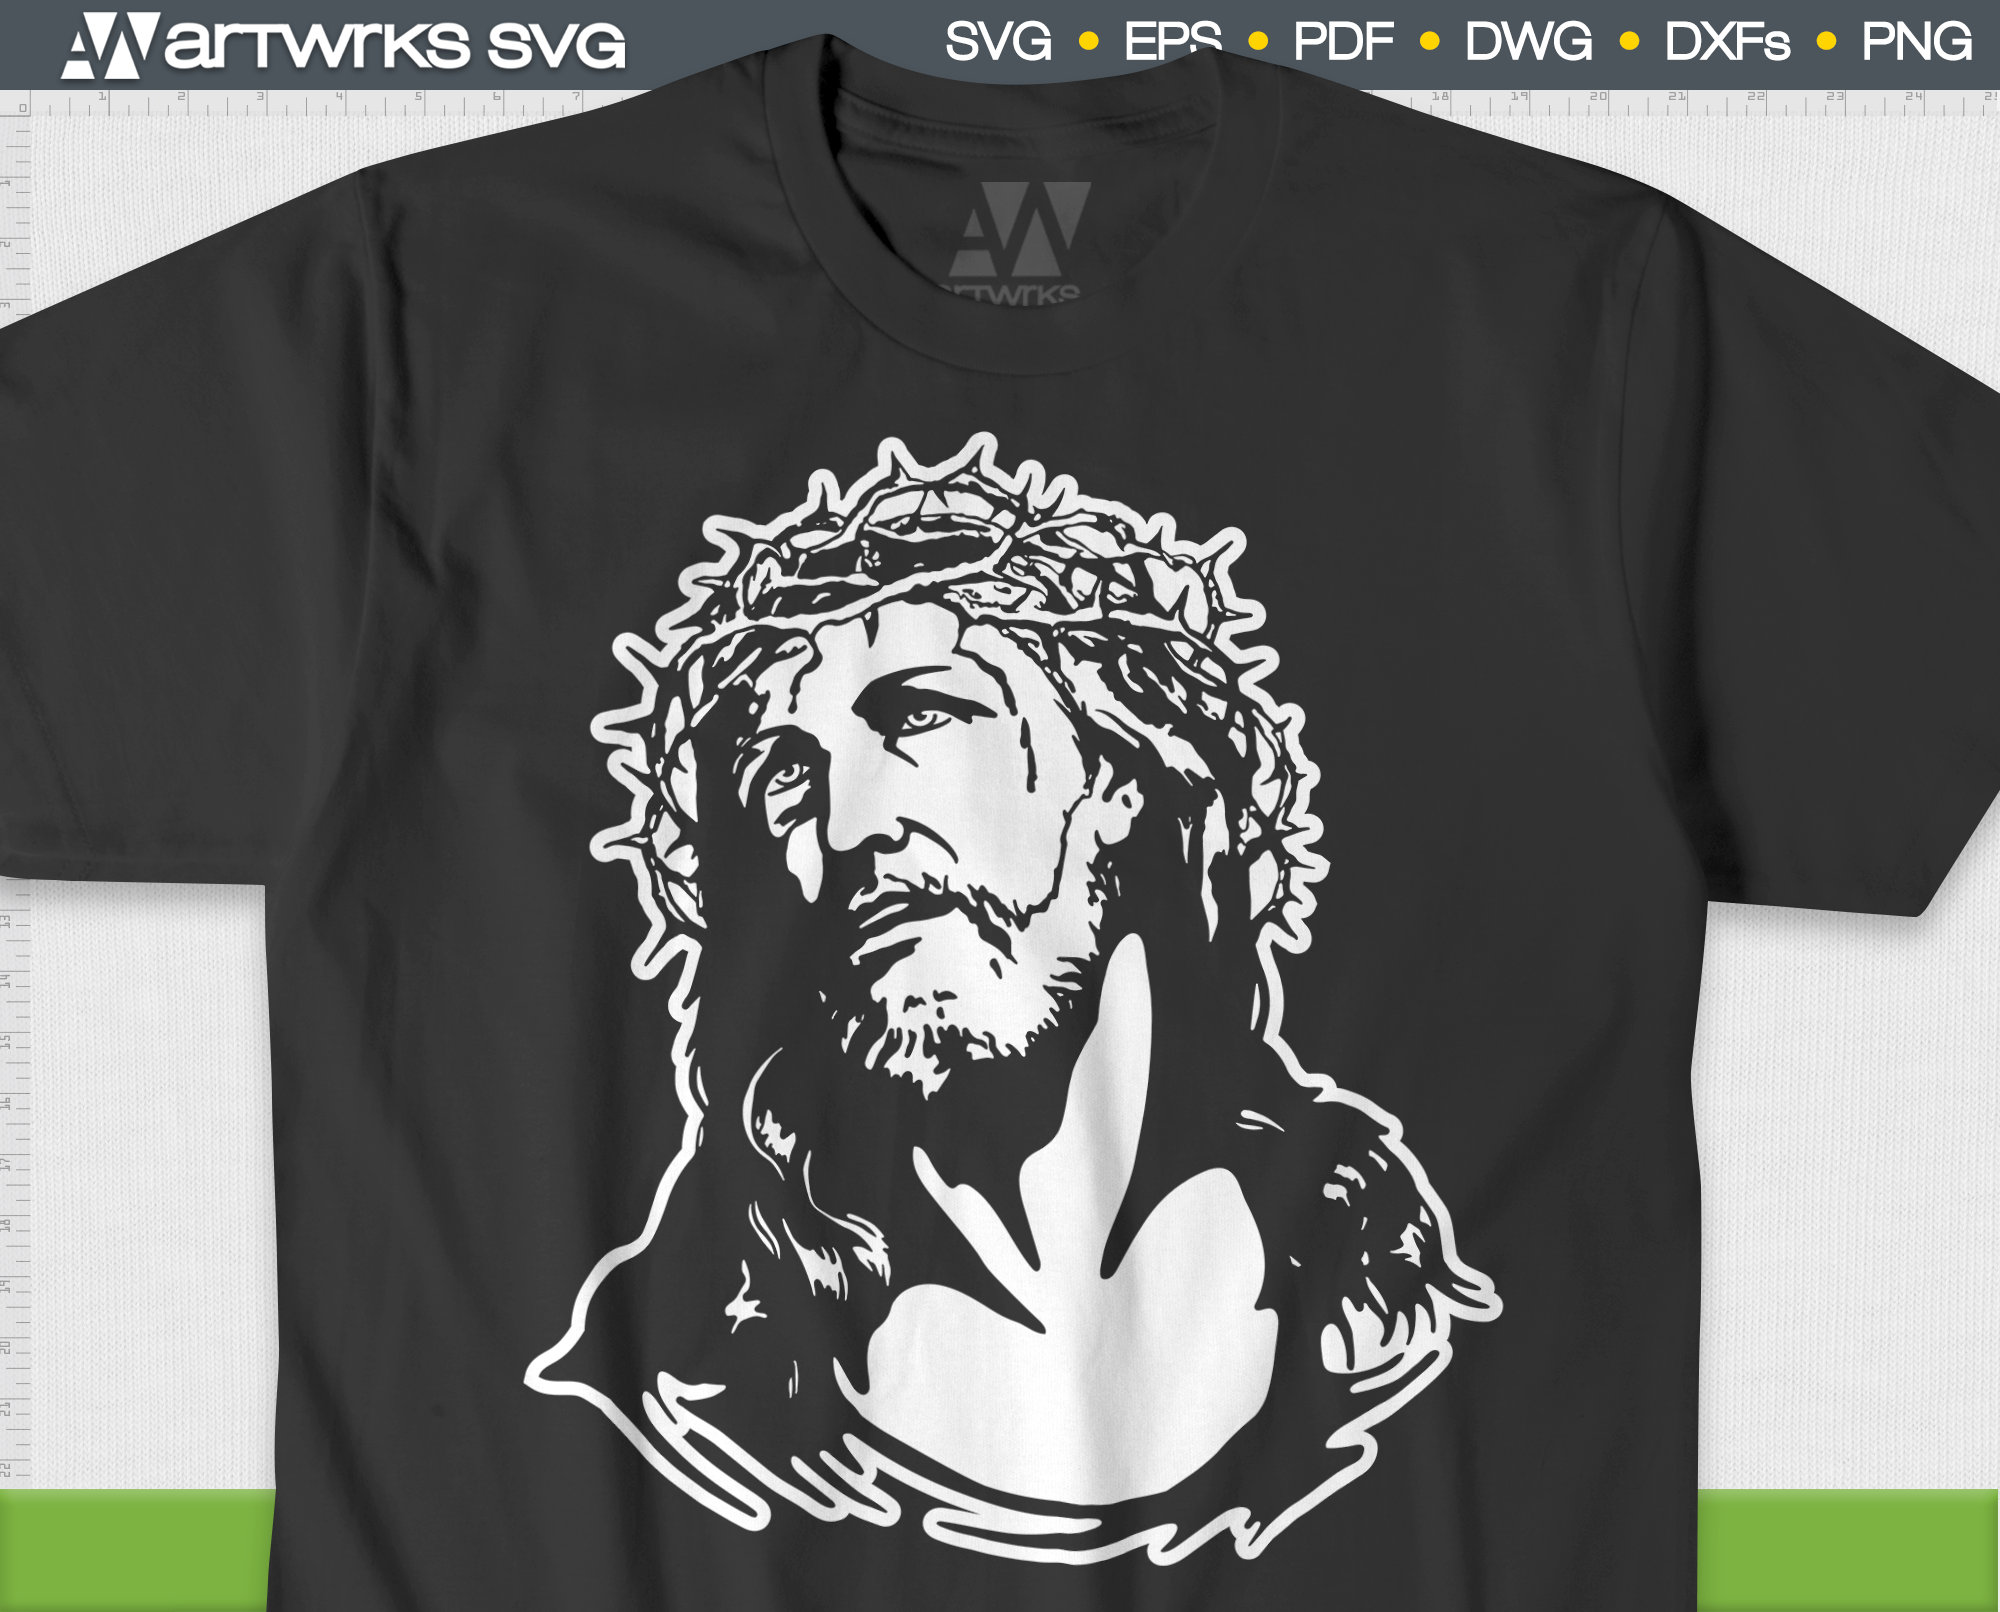 Jesus crown of thorns SVG Religious SVG by Artworks SVG | Etsy